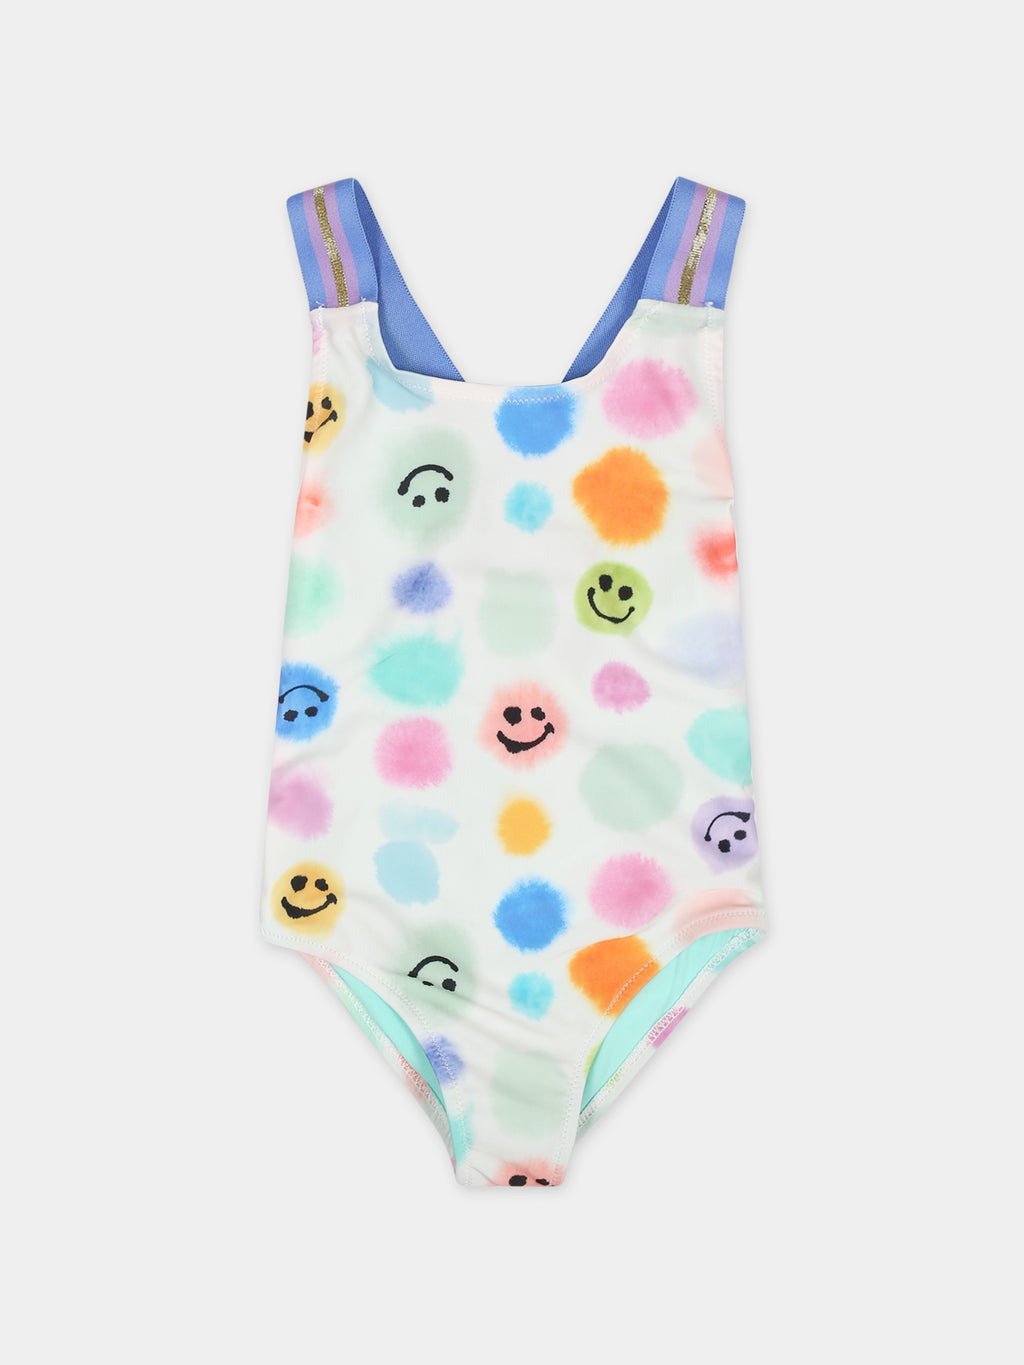 White swimsuit for baby girl with polka dots and smiley